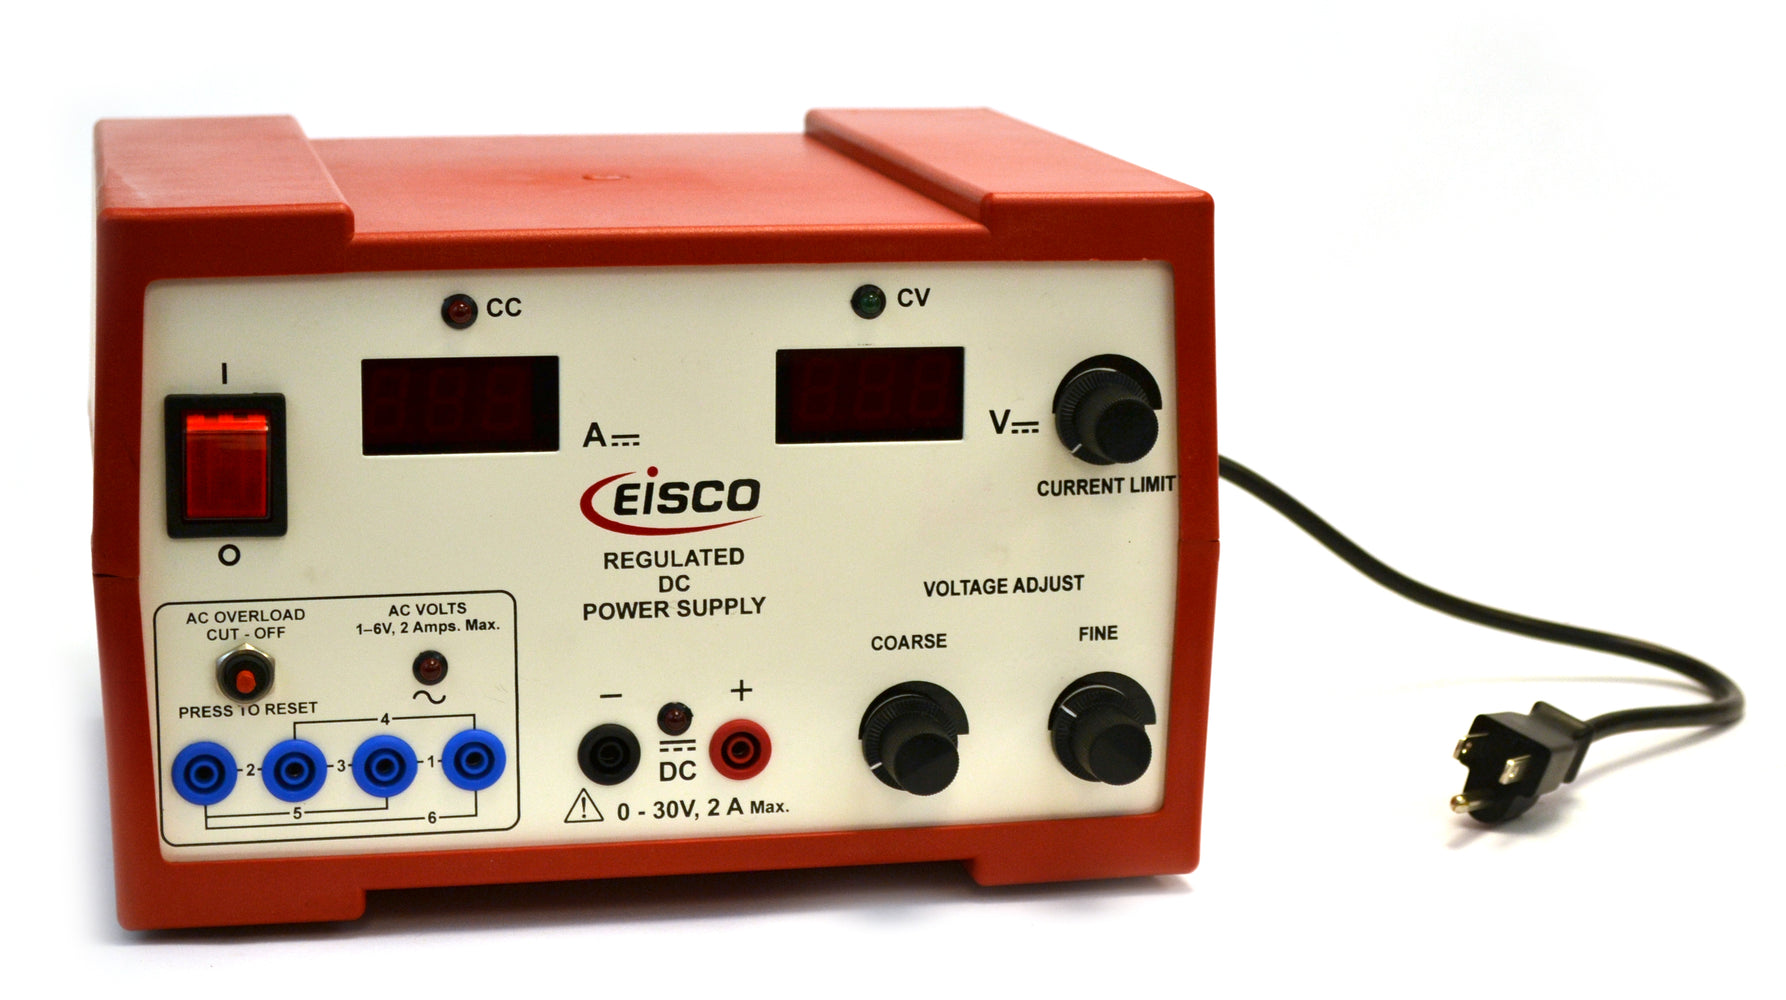 Eisco Labs Regulated DC and Standard AC Power Supply 0 - 30V / 2 Amp - Coarse and Fine Voltage Adjustment, AC 1-6V [1V increments]  (Discontinued)